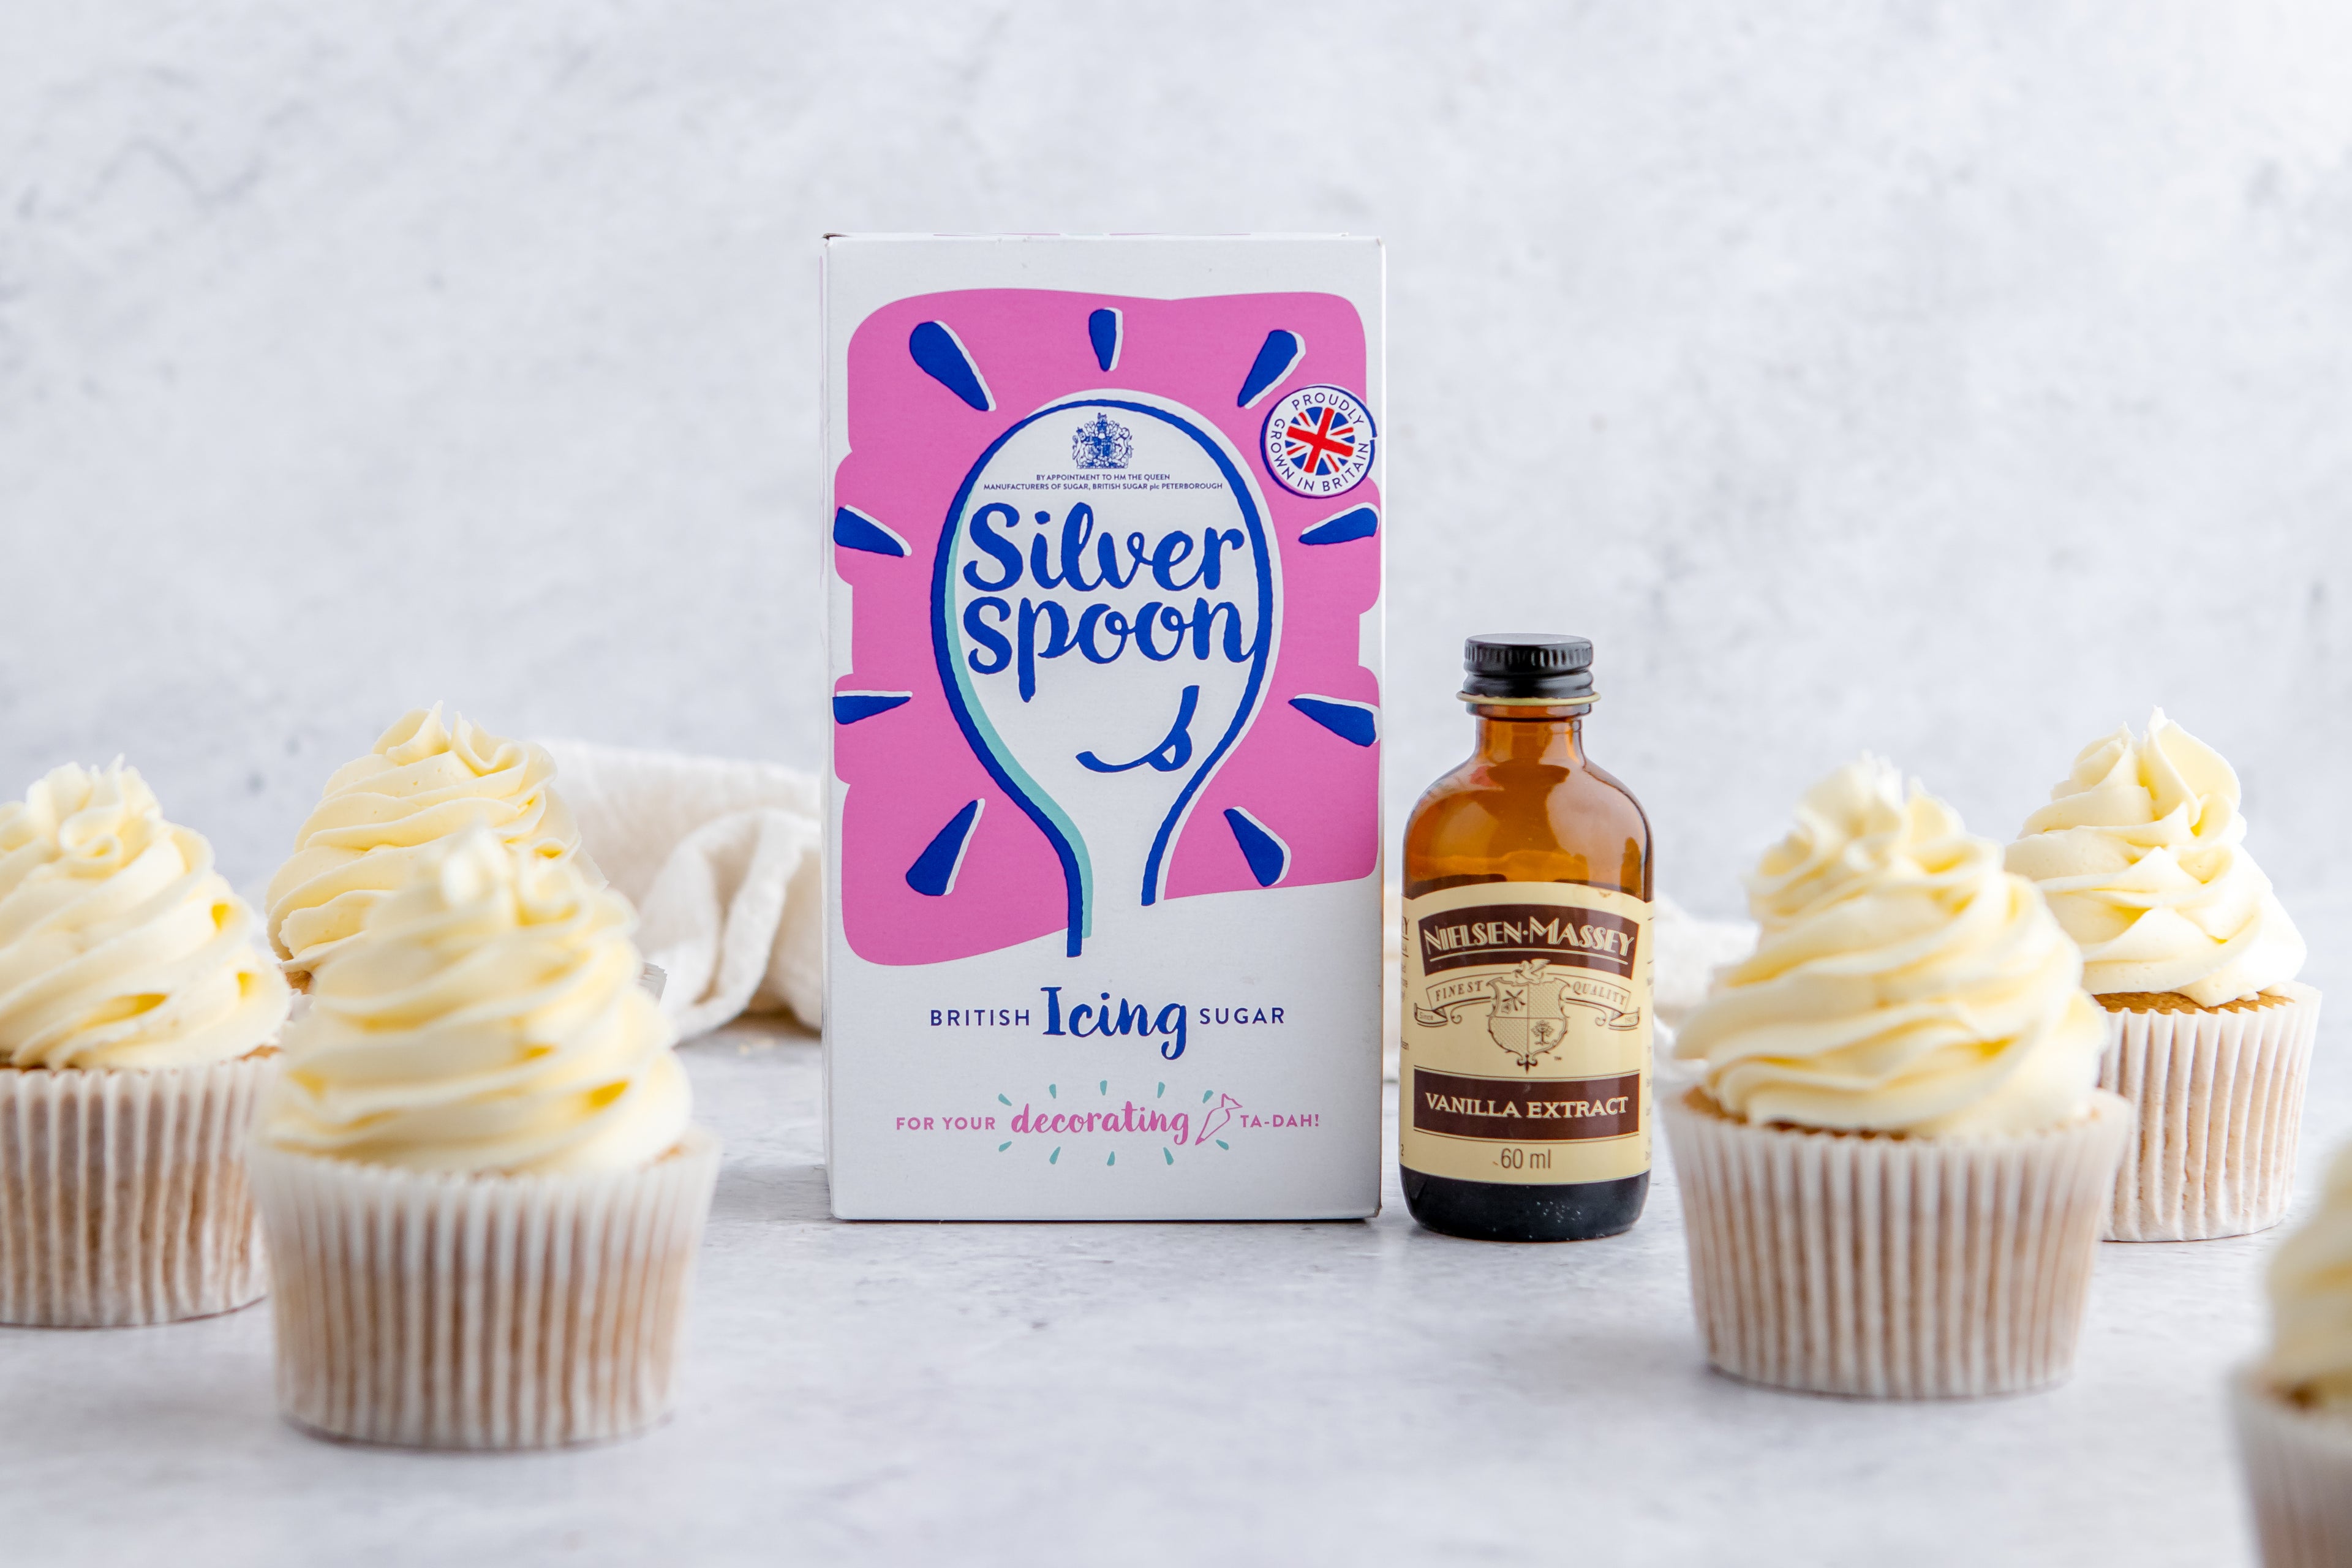 Silver Spoon Icing sugar and Neilsen-Massey vanilla extract surrounded by Gluten Free Cupcakes